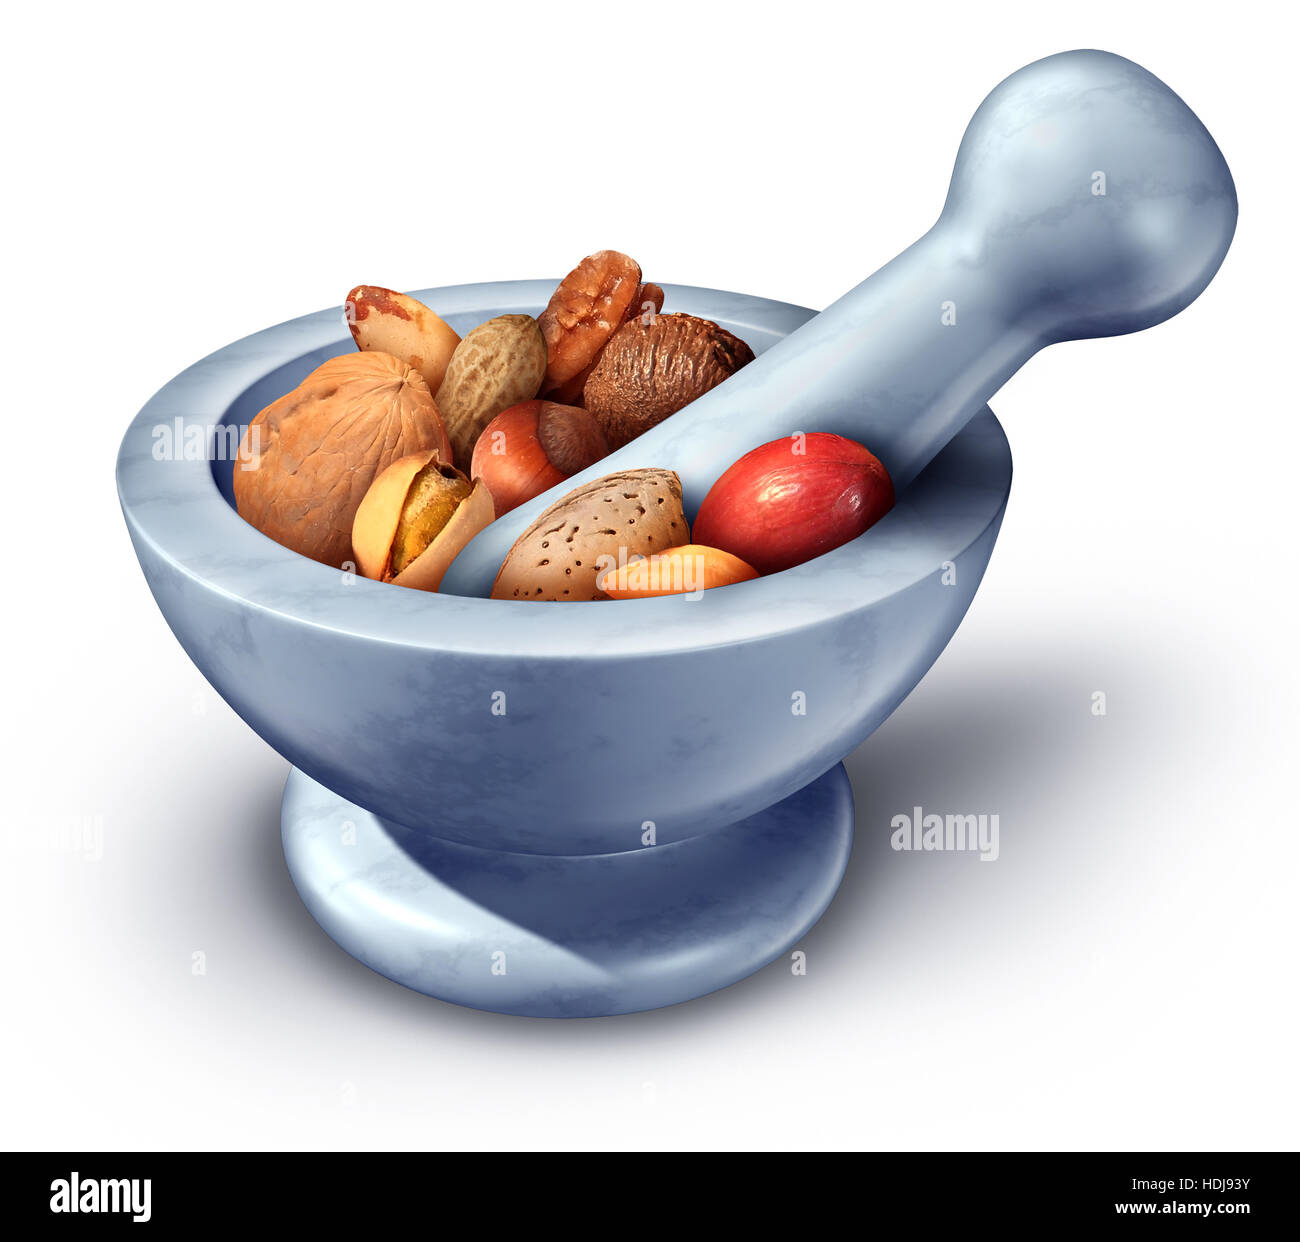 Nuts health medicine concept and the health benefits of eating a nut as walnuts pistachio and other shell fruit with a mortar and pestle as a natural Stock Photo